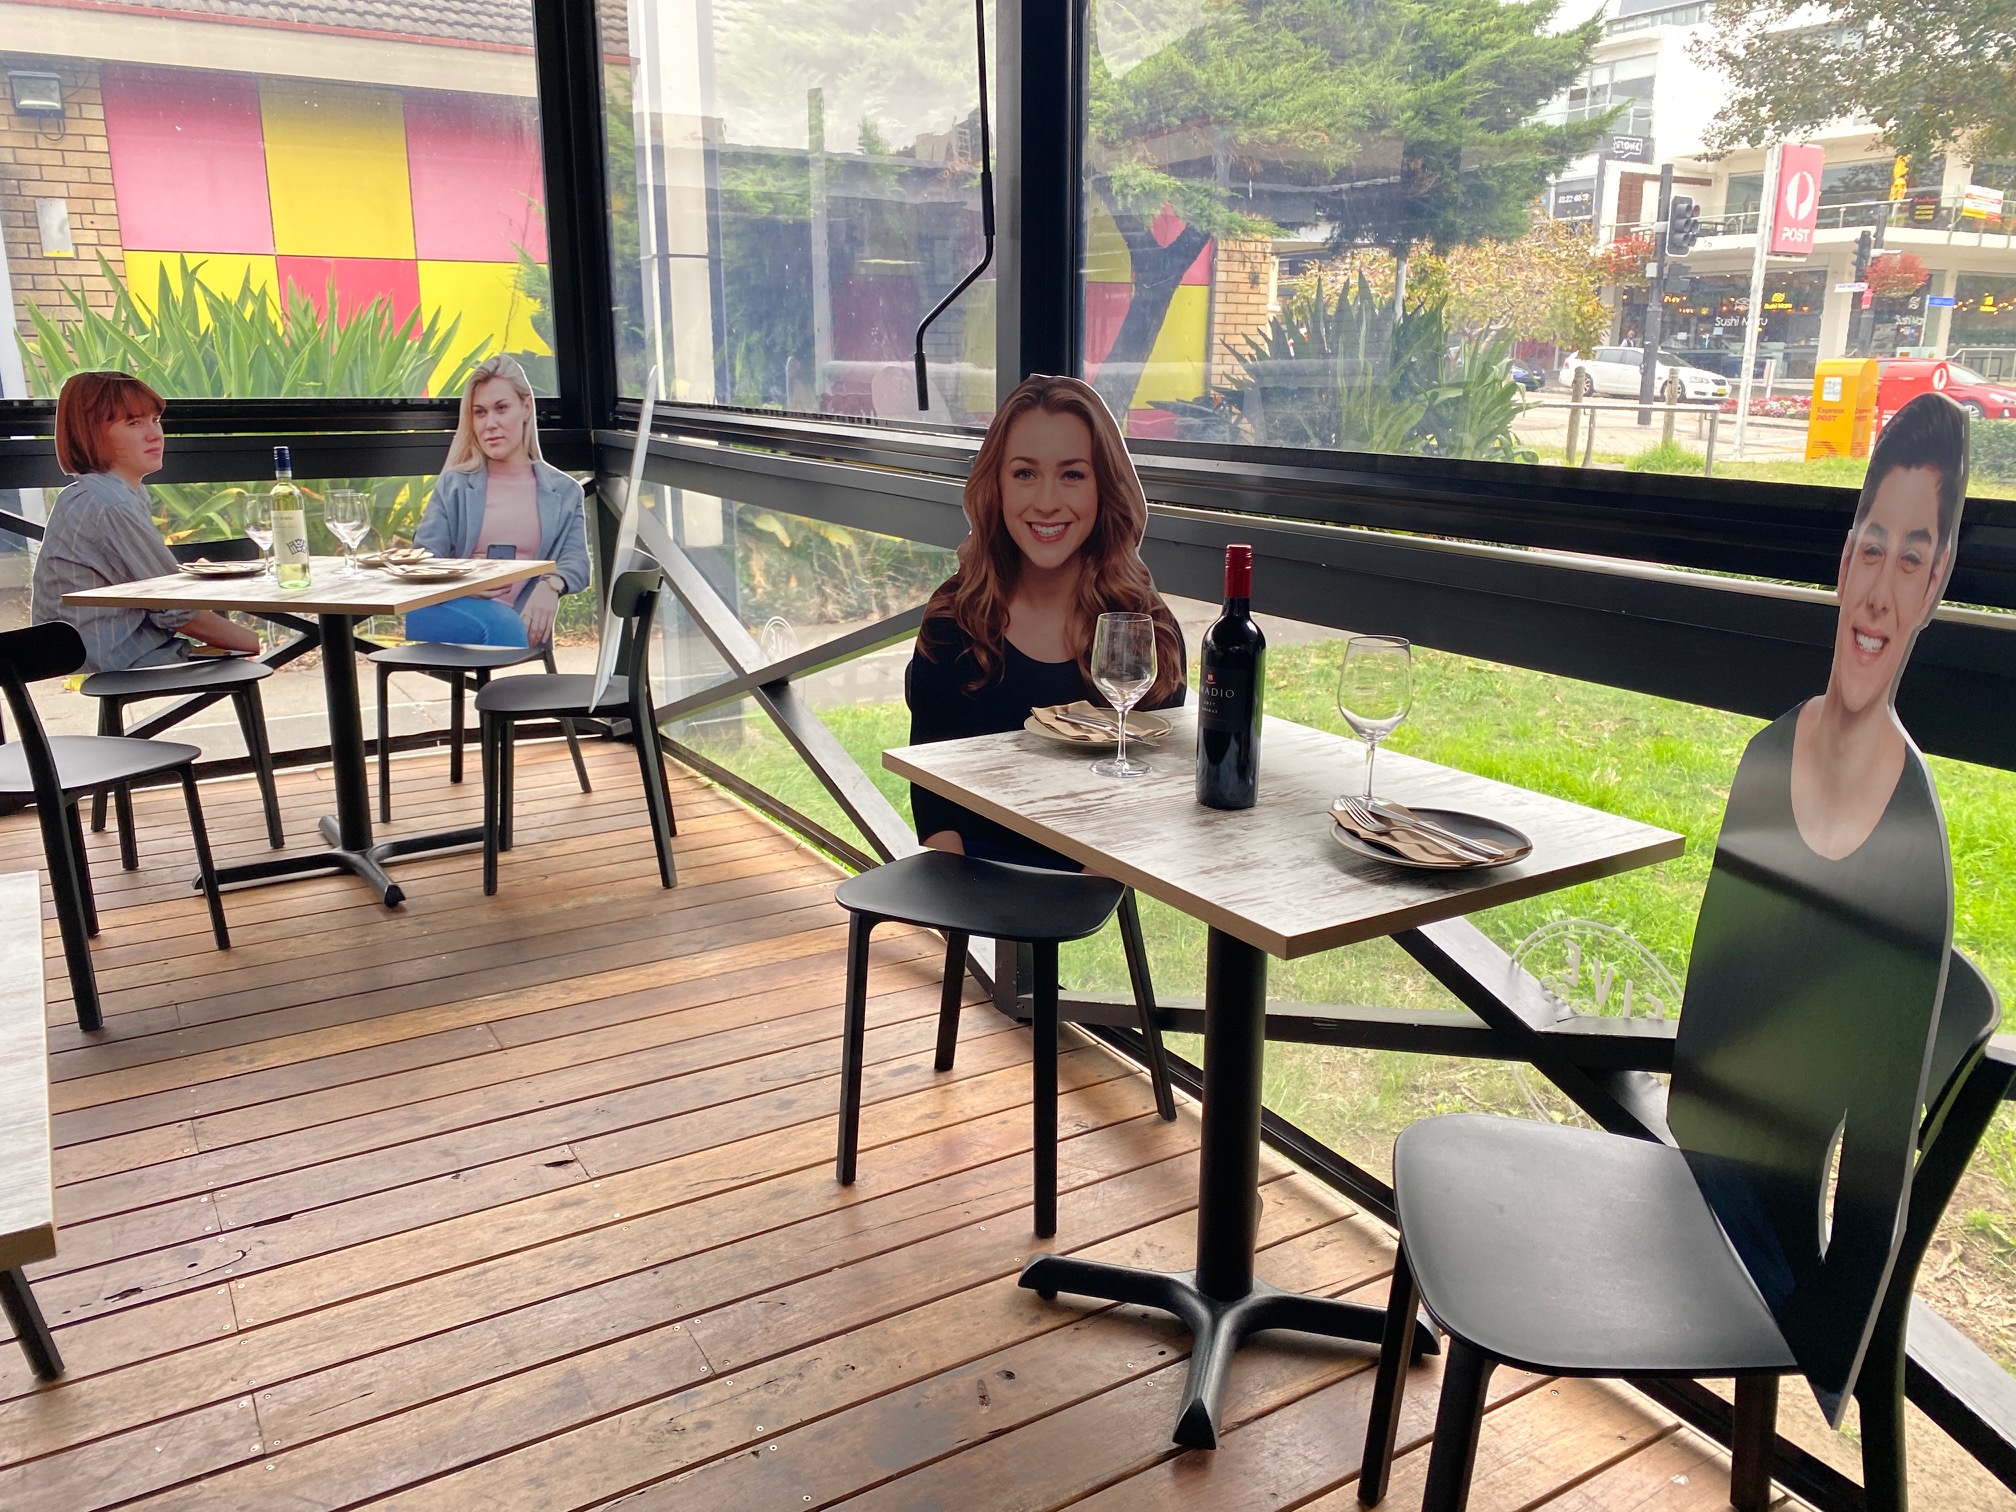 Cardboard cutout figures at Five Dock Dining in Five Dock, Australia. (Photo courtesy of Frank Angilletta/Five Dock Dining)